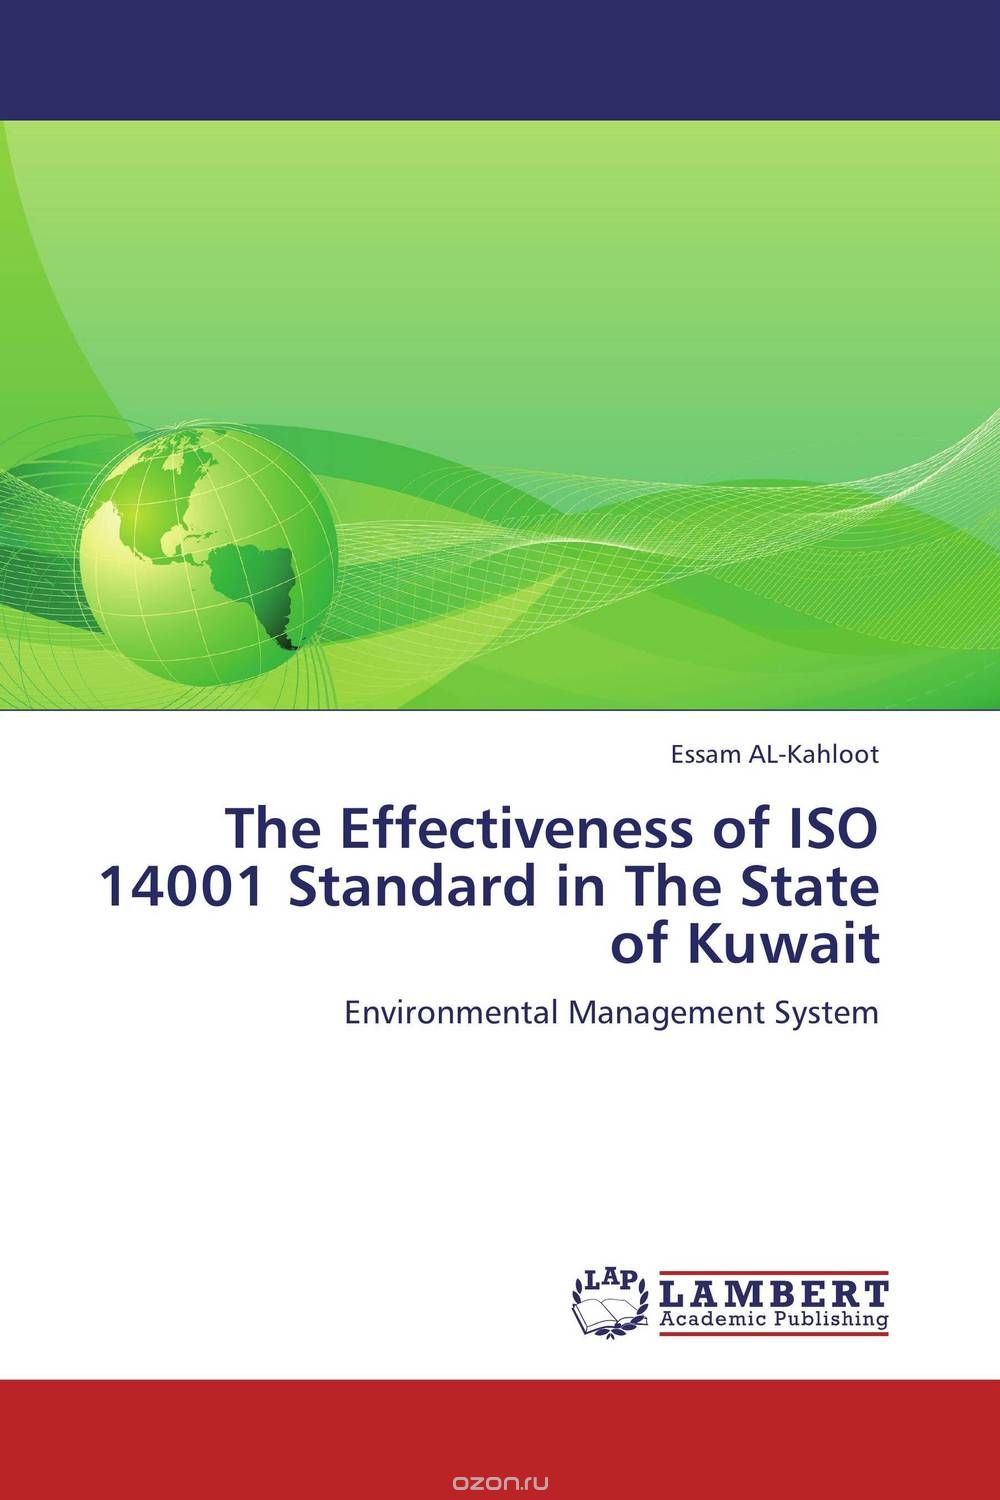 Скачать книгу "The Effectiveness of ISO 14001 Standard in The State of Kuwait"